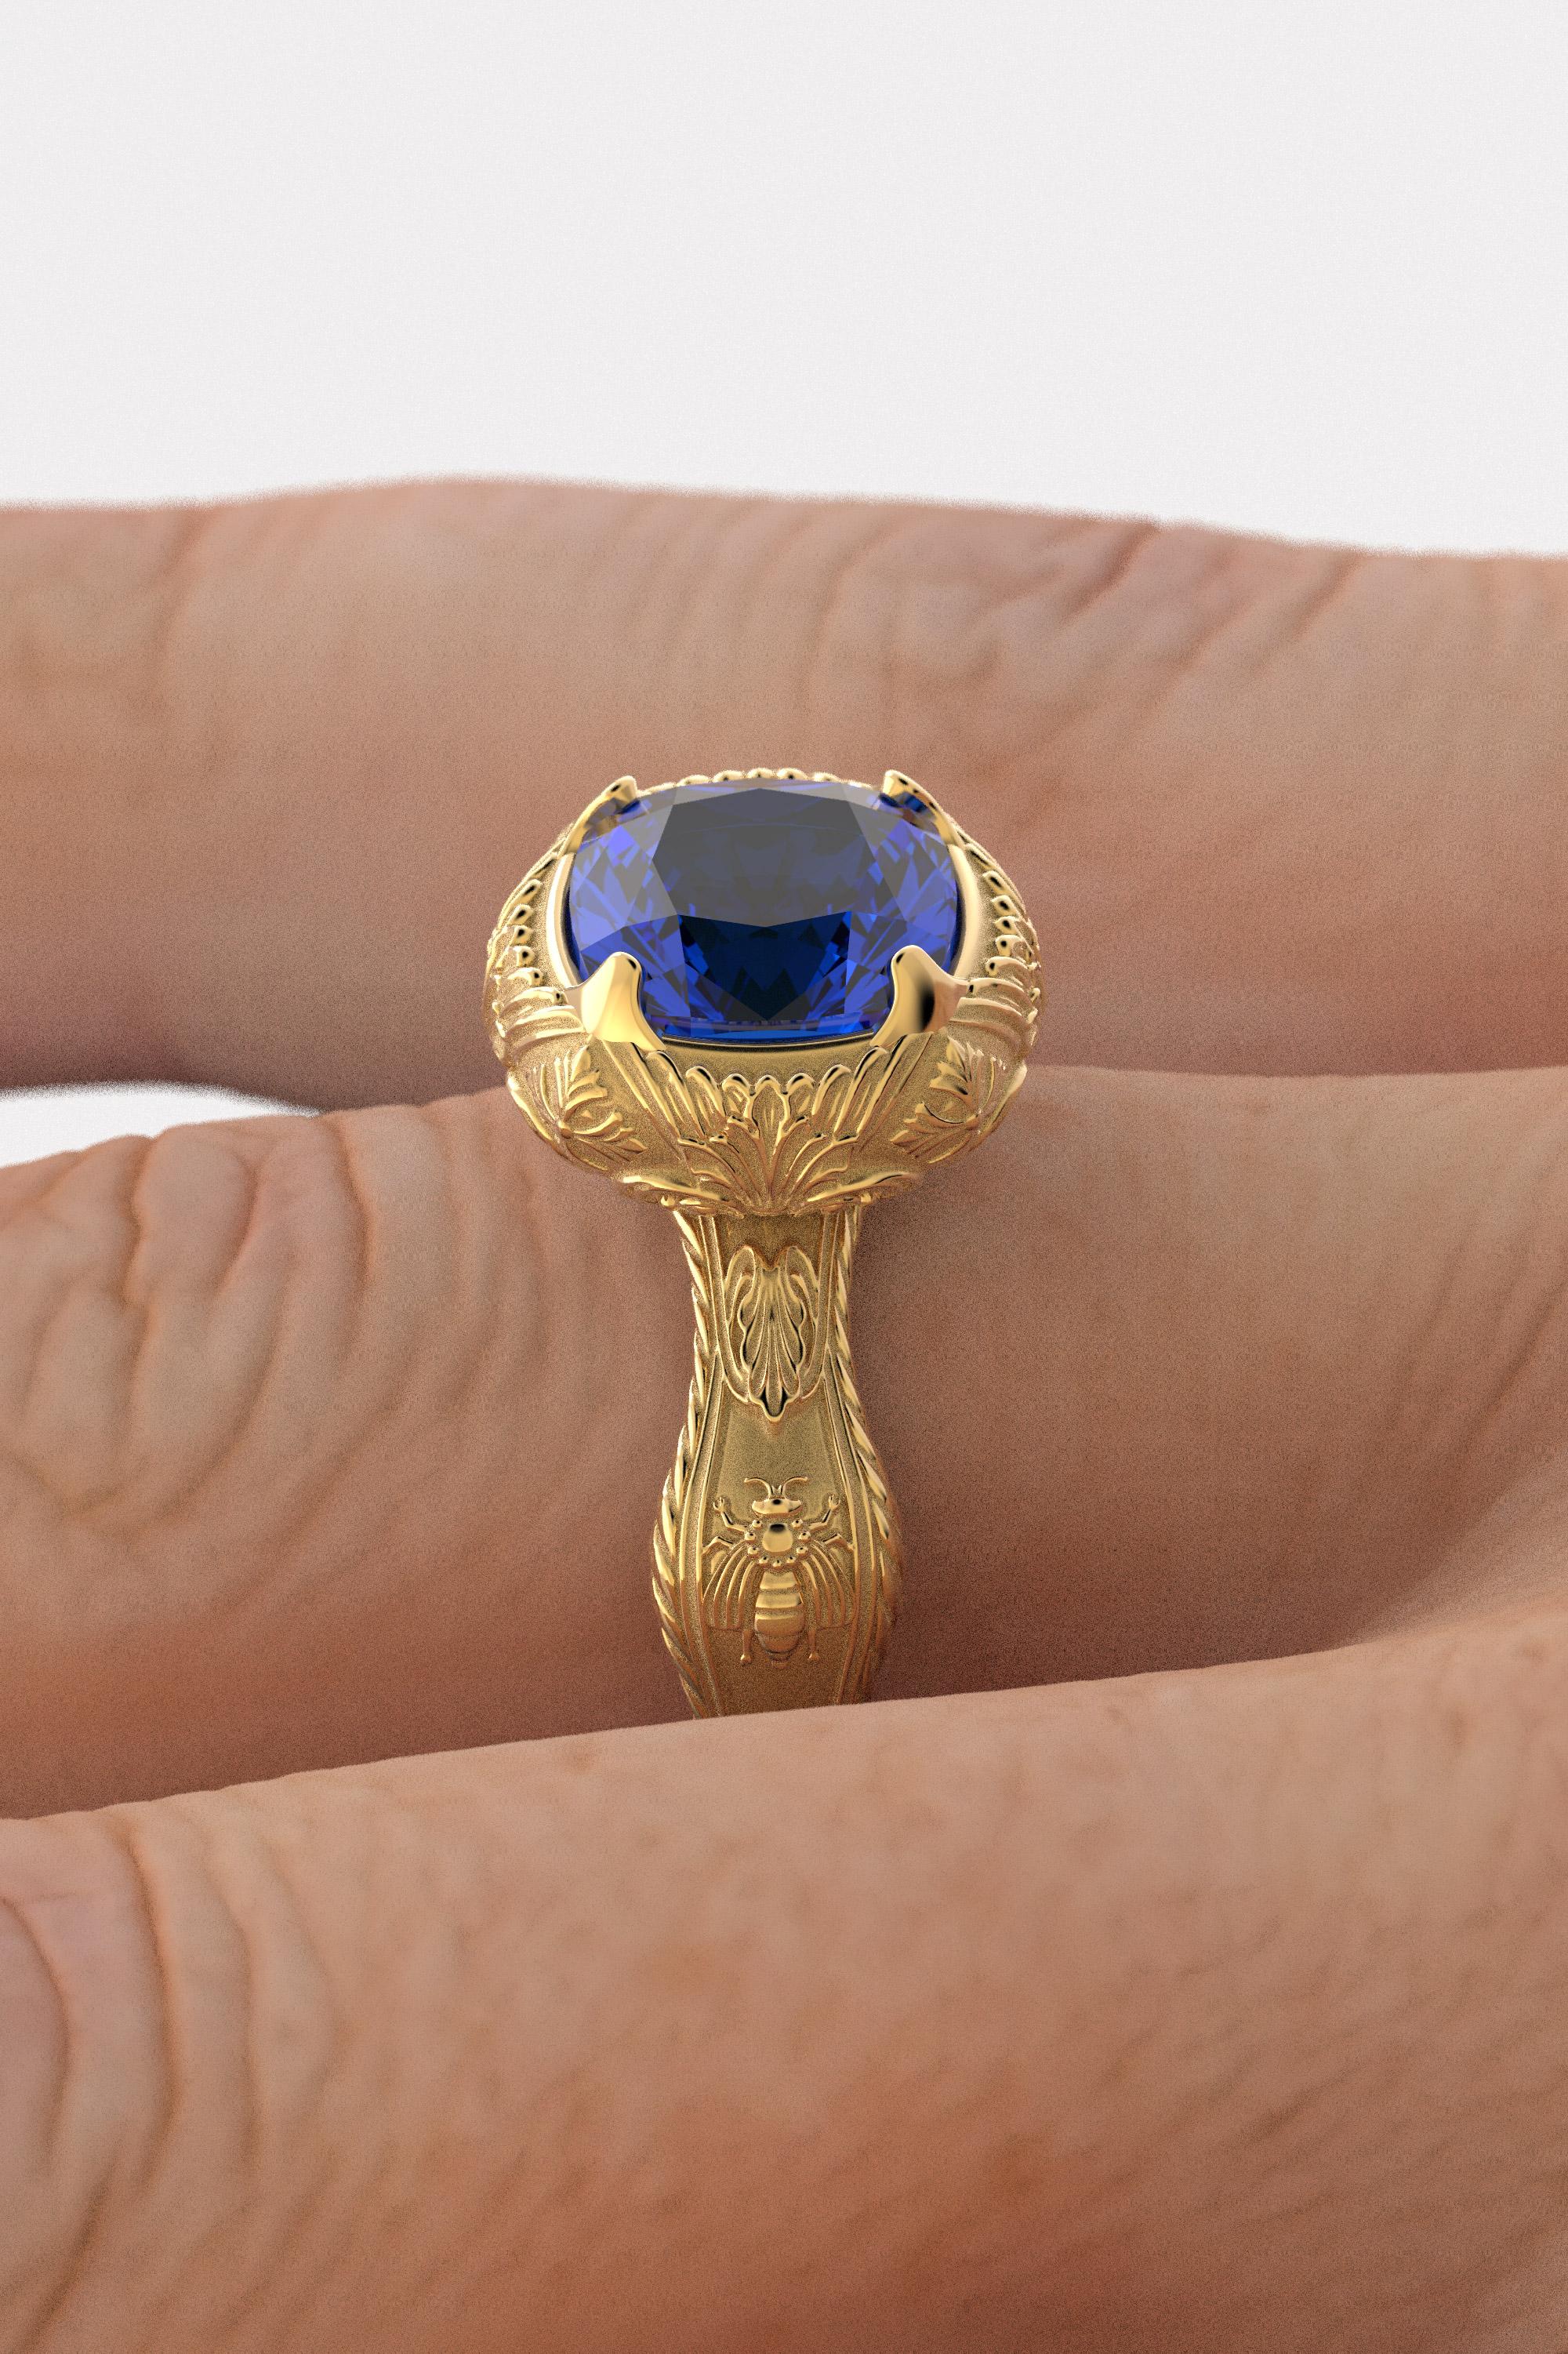 For Sale:  Tanzanite Ring Made In Italy by Oltremare Gioielli in 18k genuine gold 4